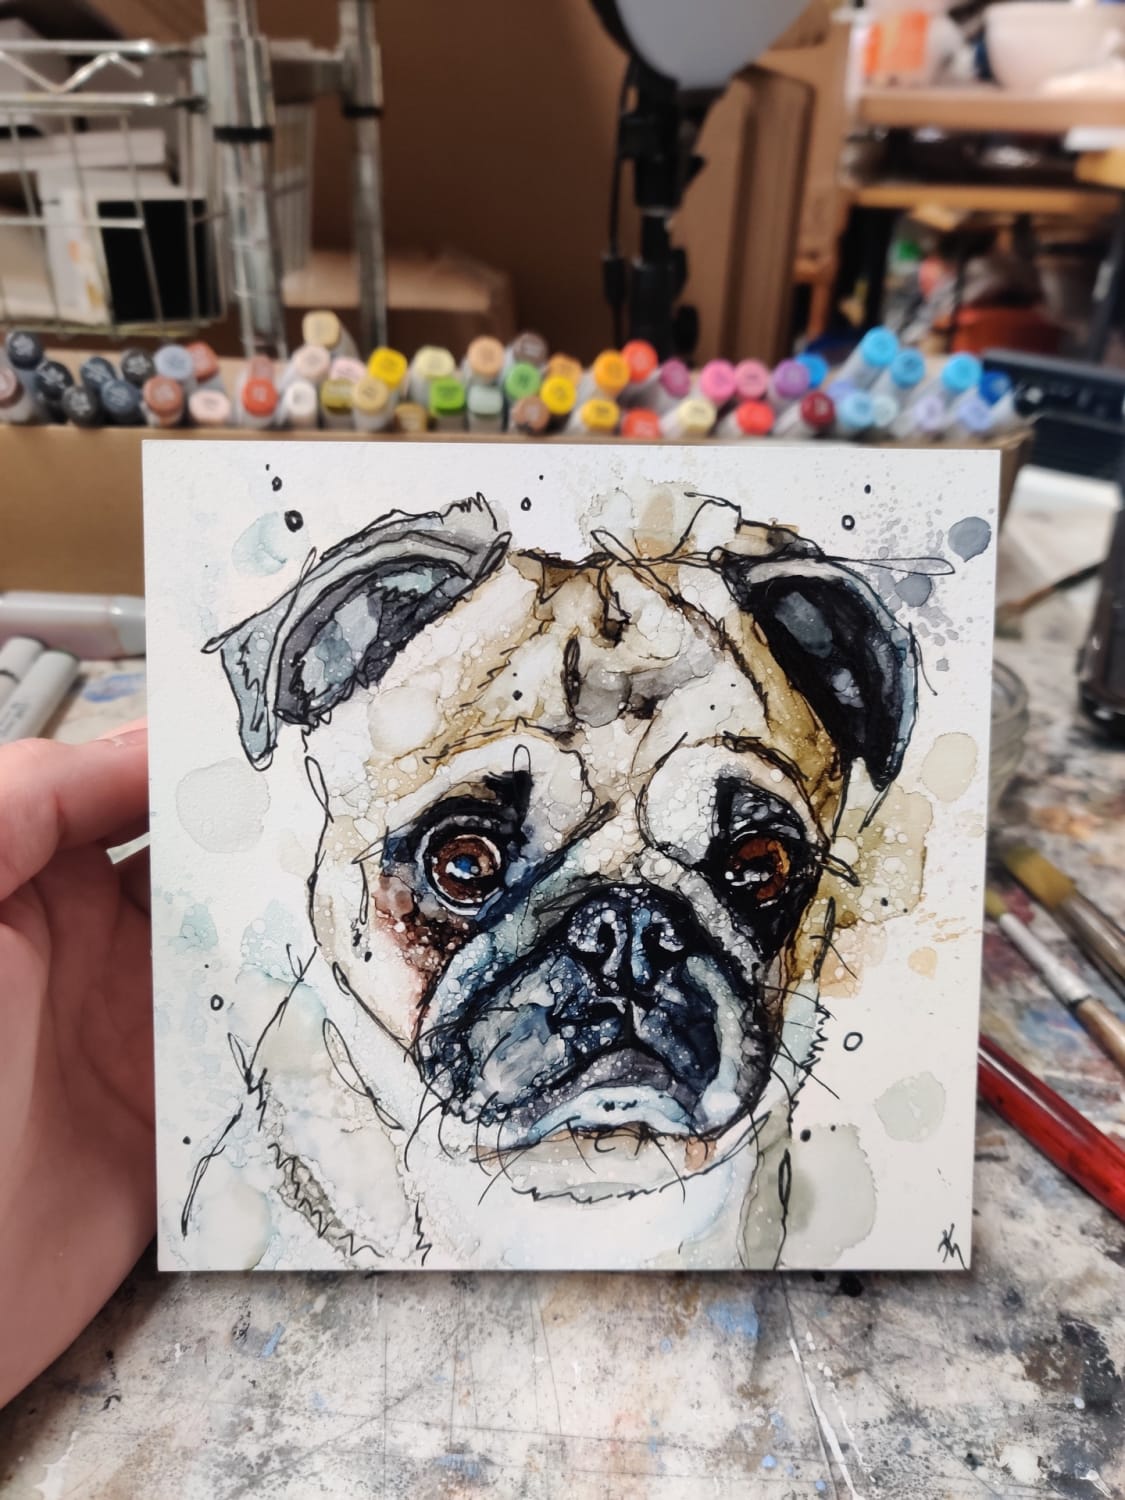 I painted this pug! I used an interesting mix of alcohol inks, acrylic, and paint pens.